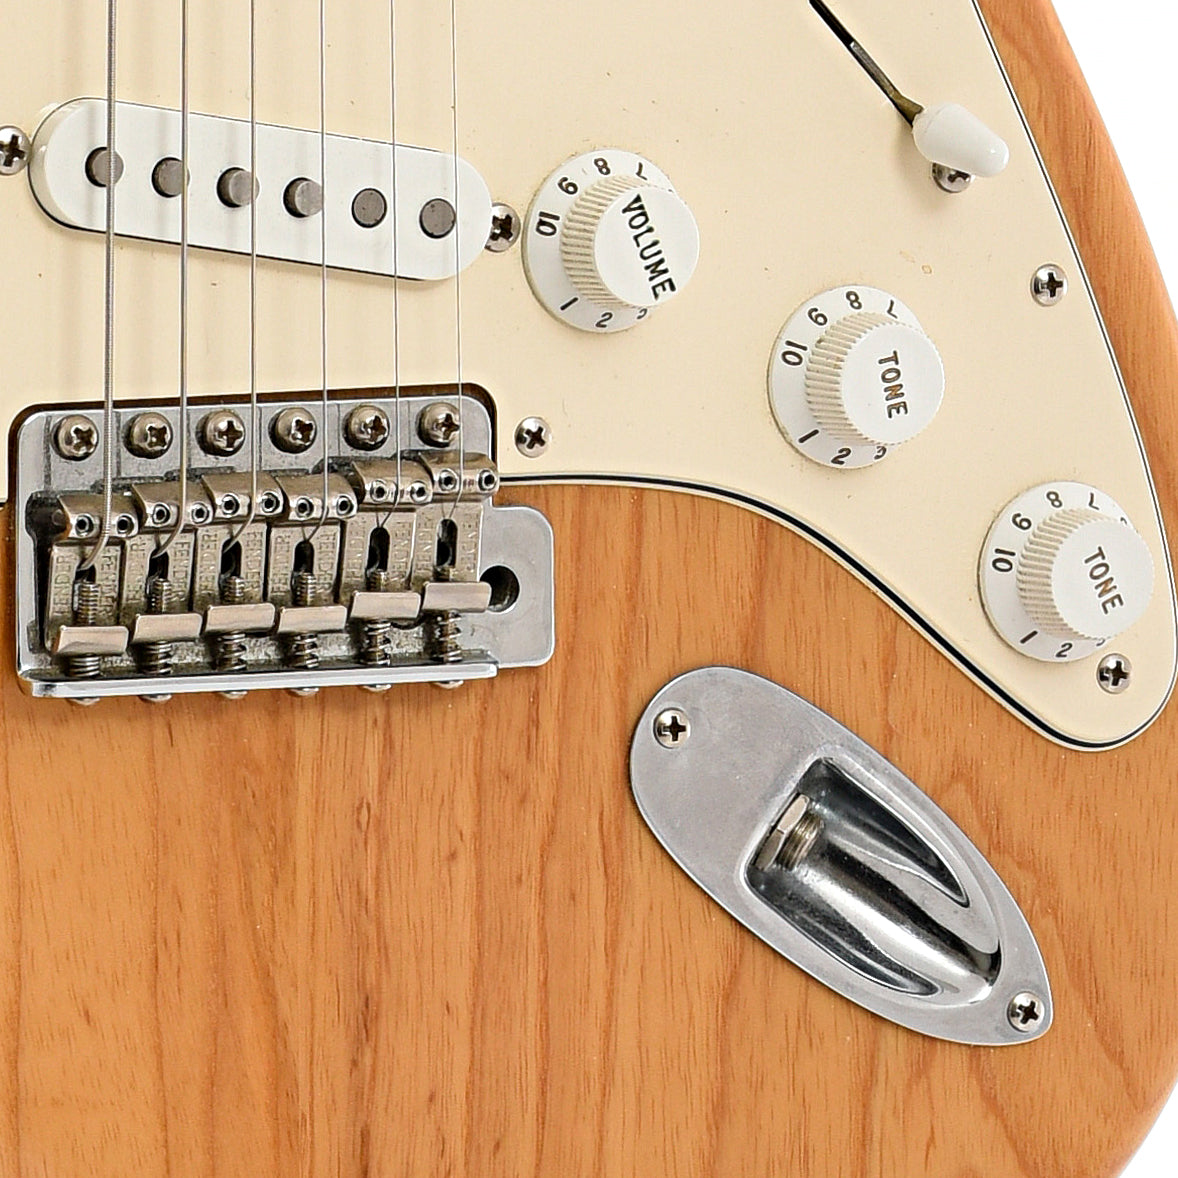 Bridge and controls of Fender Stratocaster 70s Reissue